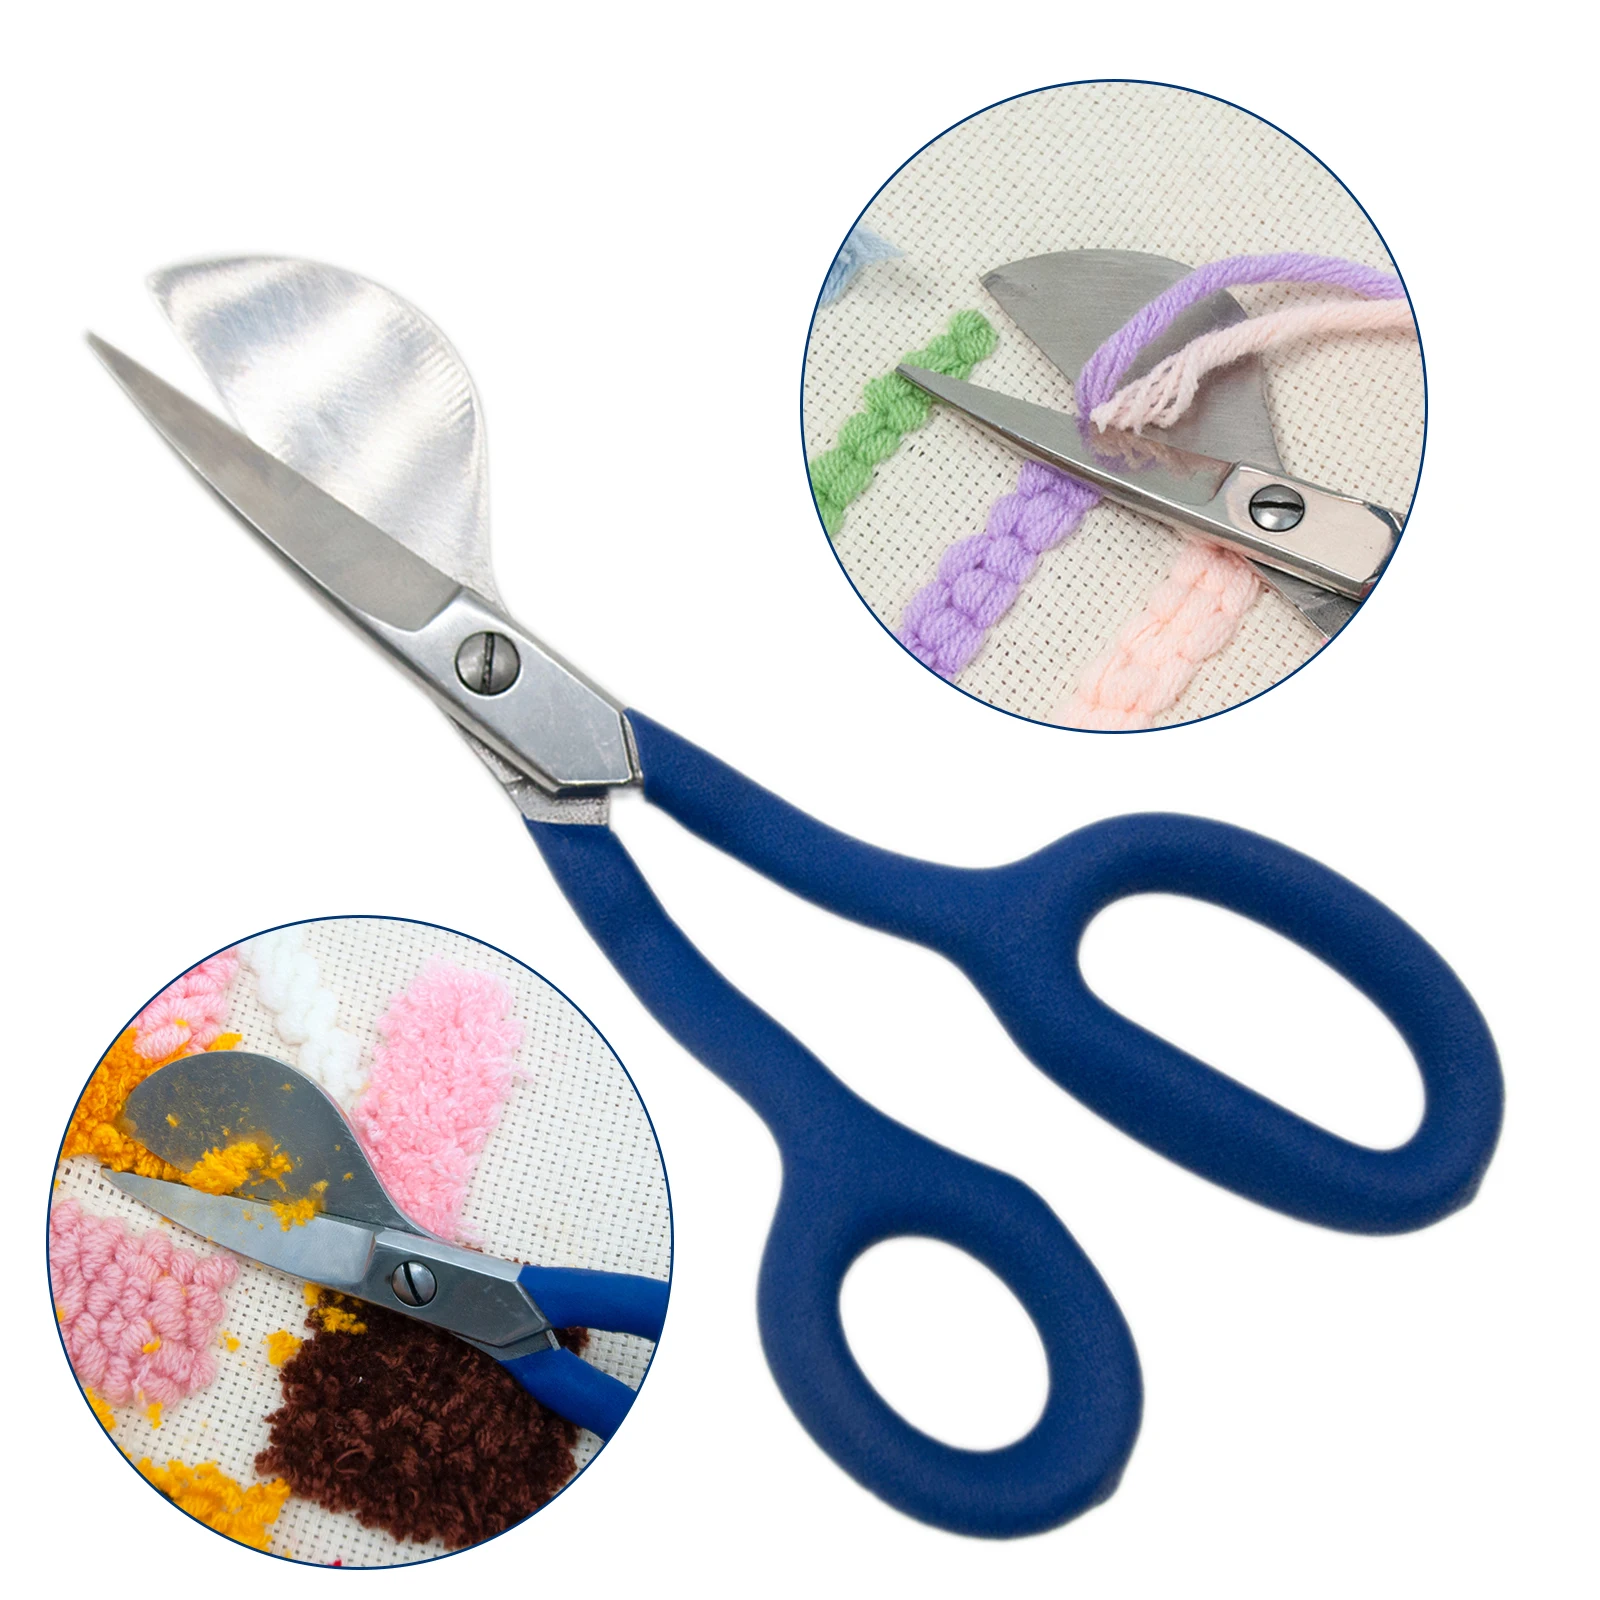 

Duckbill Blade Scissors Tufted Carpet Soft Rubber Handle Precision Applique Craft Household Sewing Crafting Shears Sharp Sturdy